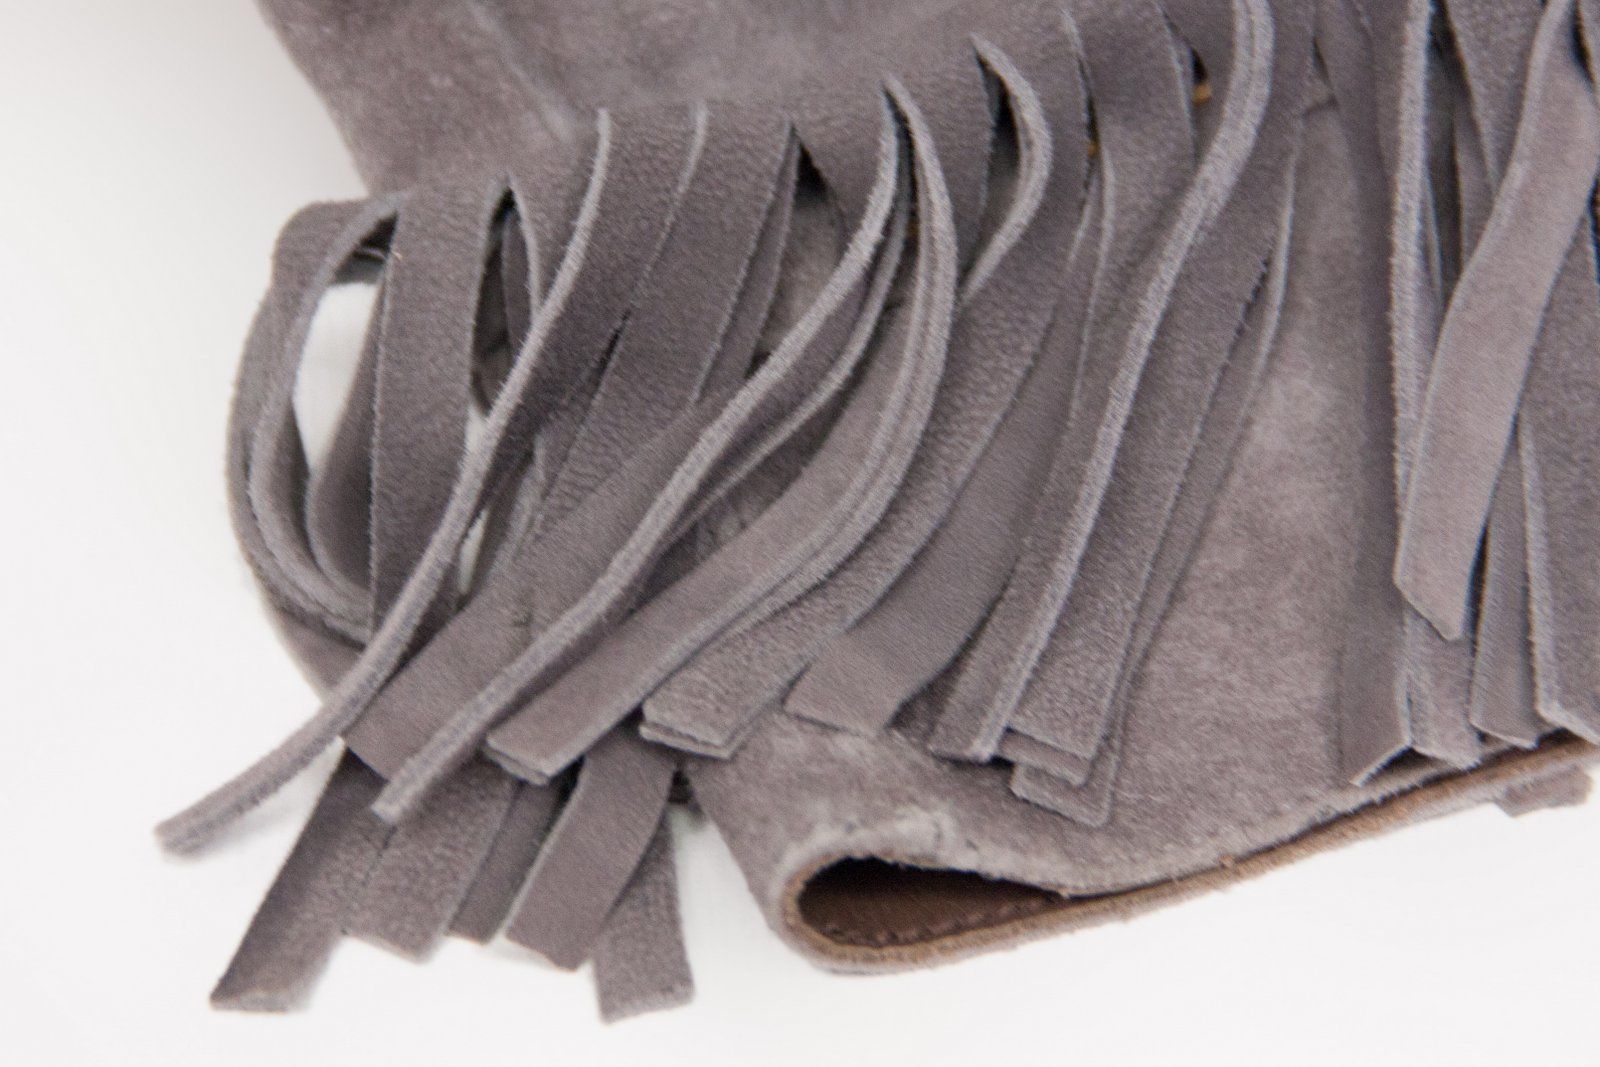 BELLE Top Collezione Italian Gray Suede Leather Fringe Heel Boots, EUR35/UK3/US5 - secondfirst